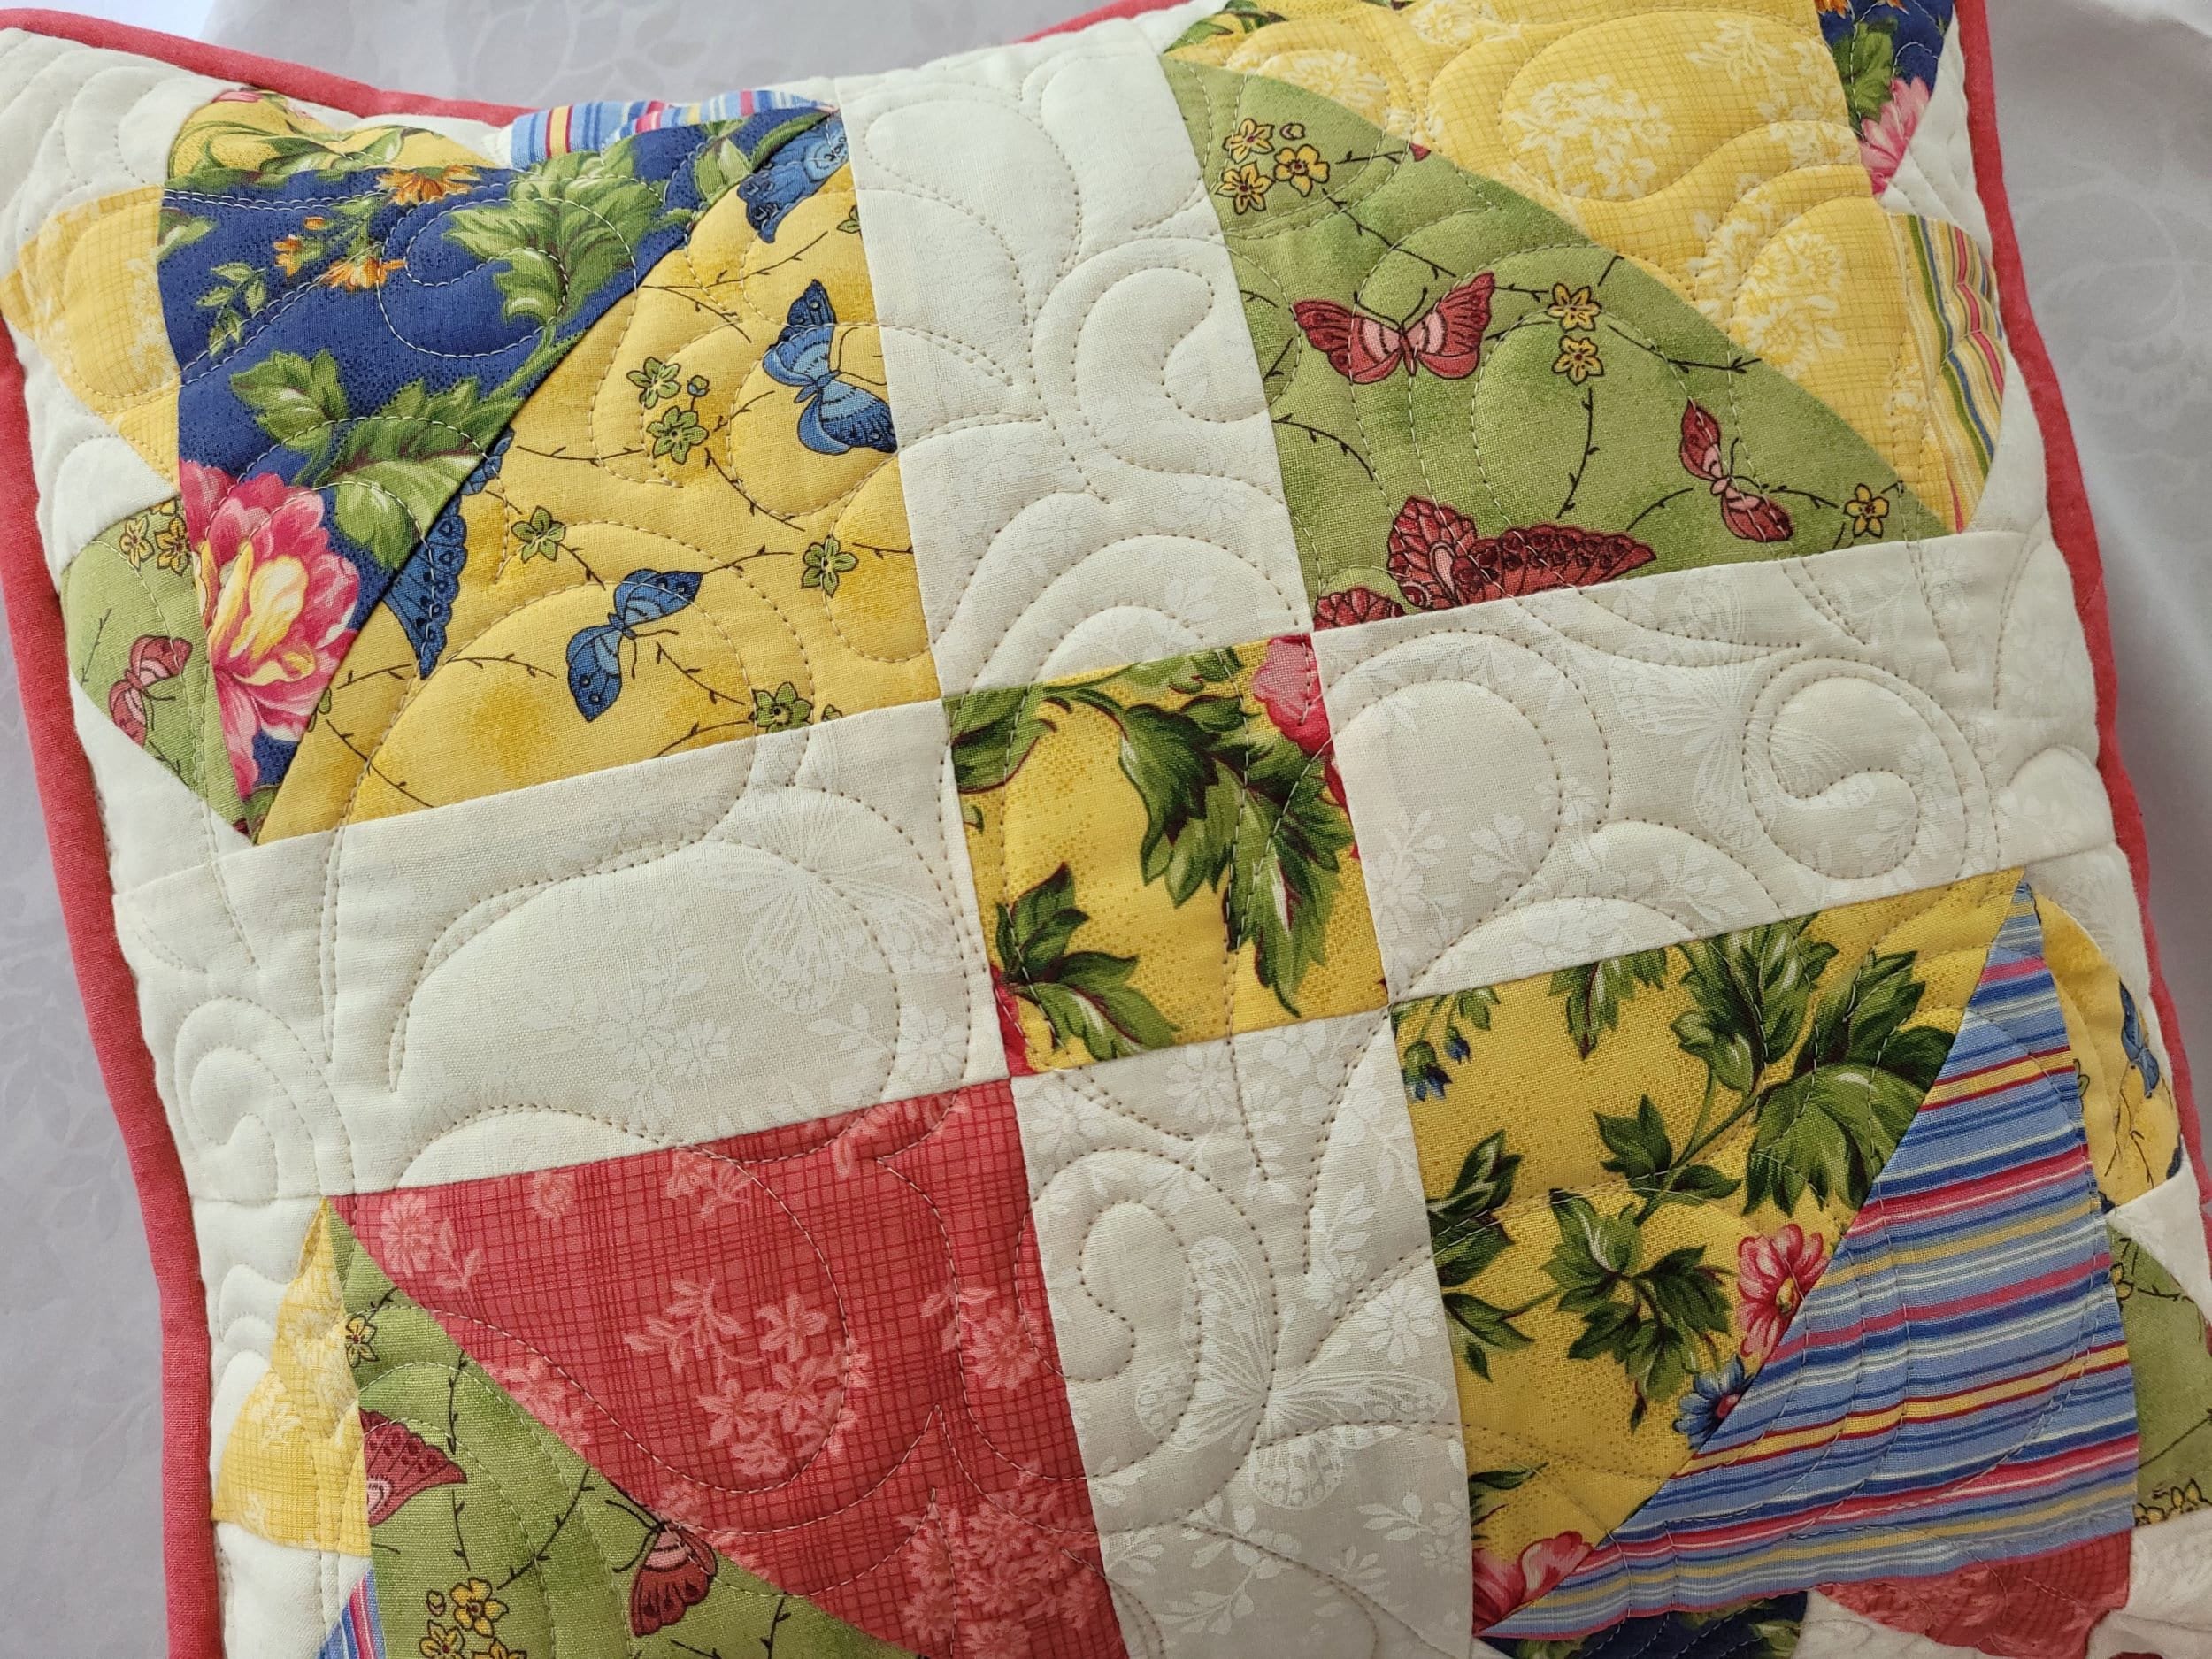 yellow, green, pink and blue floral prints are featured in this patchwork bear paw pillow